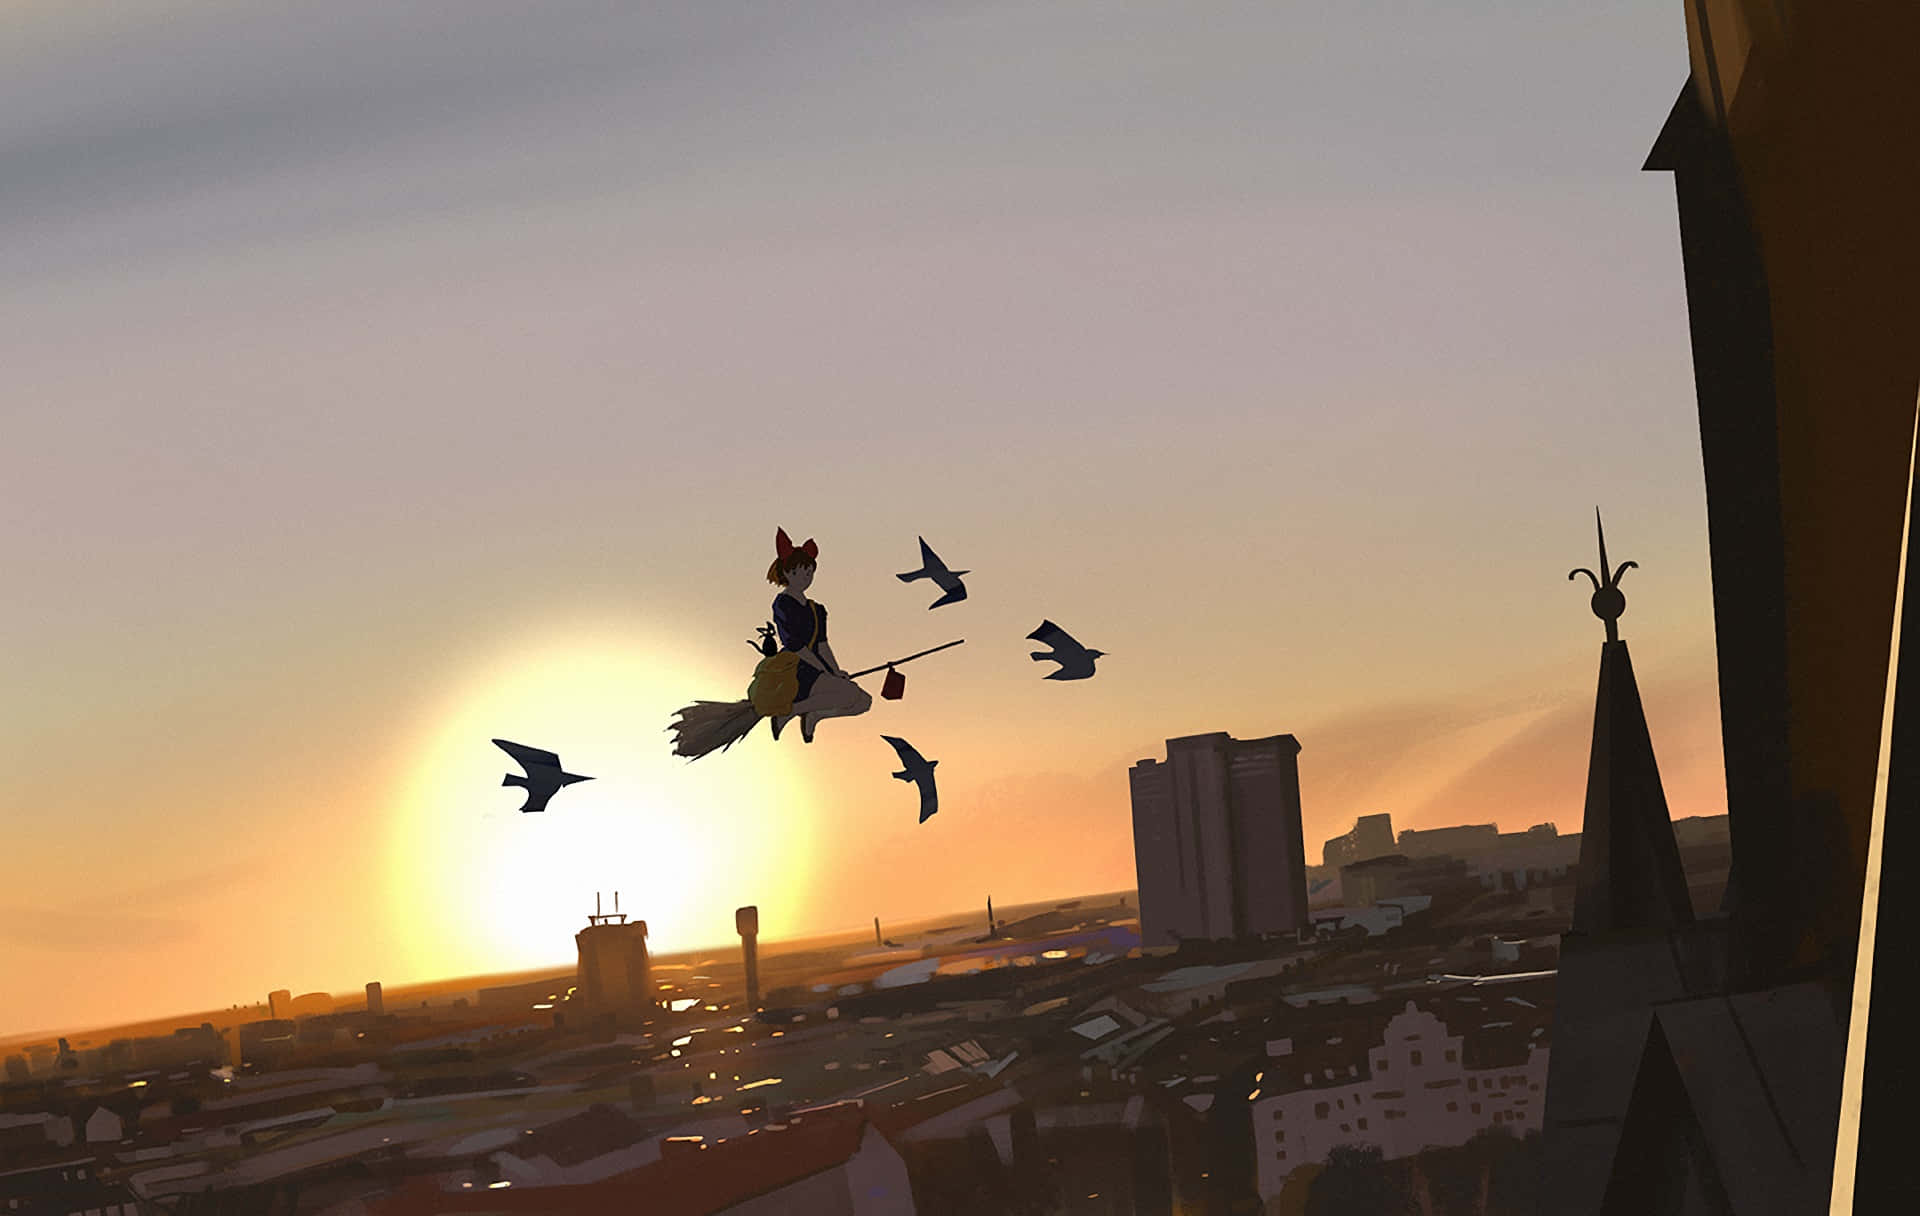 Kiki flying over the city with Jiji on her broom in Kiki's Delivery Service Wallpaper